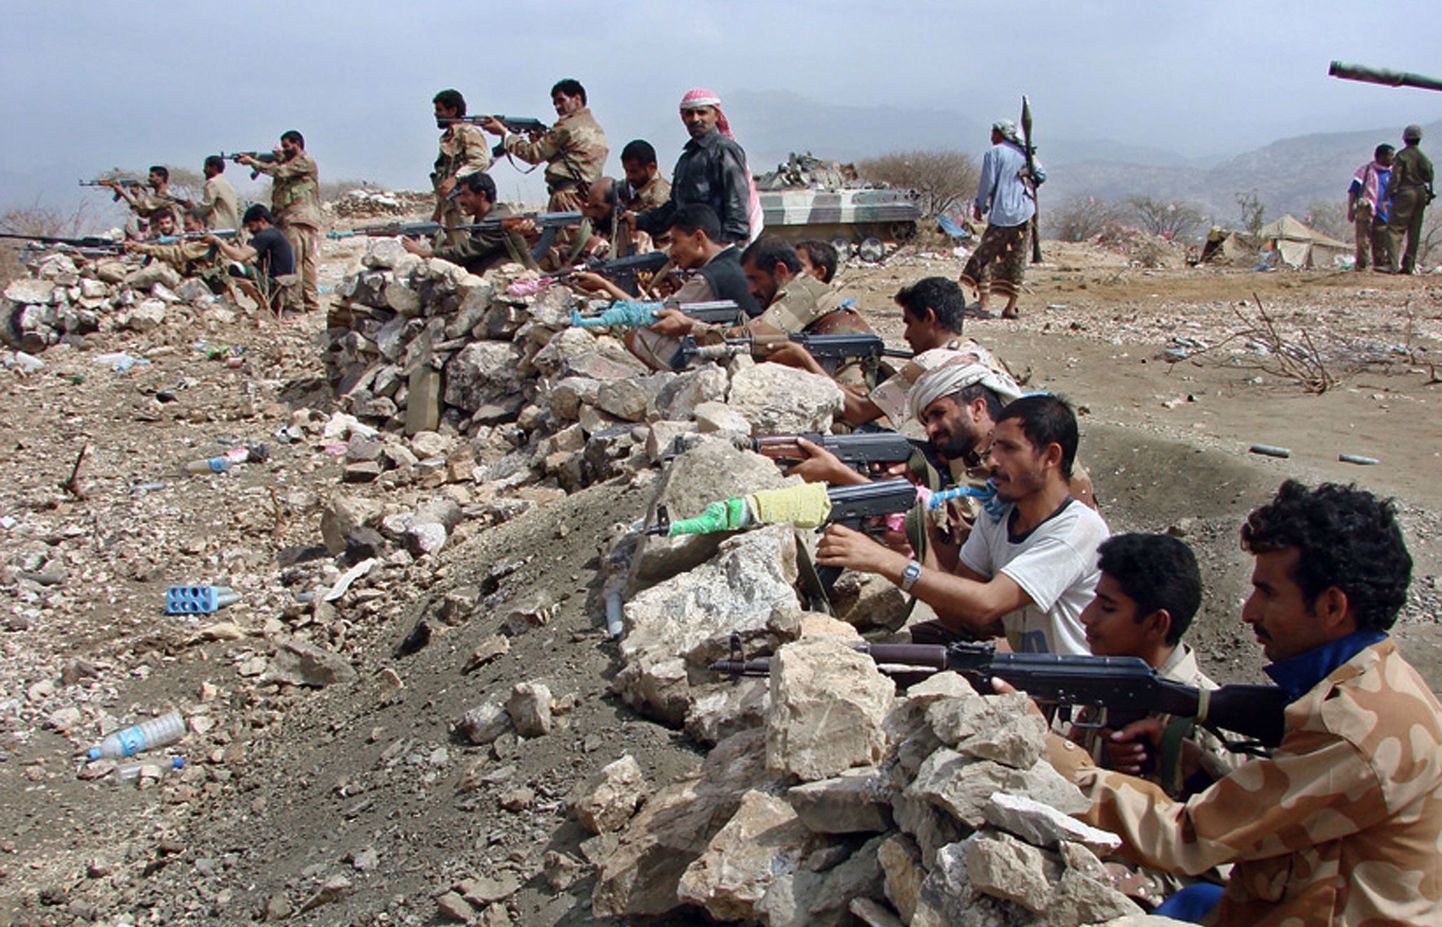 A handout picture made available from the Yemeni defence ministry on January 24, 2010 shows Yemeni soldiers and tribe members taking position during clashes against al-Huthi Shiite rebels in Daher al-Himar in the province of Saada, north of Yemen. Al-Qaeda is coordinating with Yemen's Huthi rebels battling Yemen and Saudi government forces along the two countries' border, Saudi Deputy Defence Minister Prince Khaled bin Sultan said on January 23. AFP PHOTO/HO == RESTRICTED TO EDITORIAL USE ==